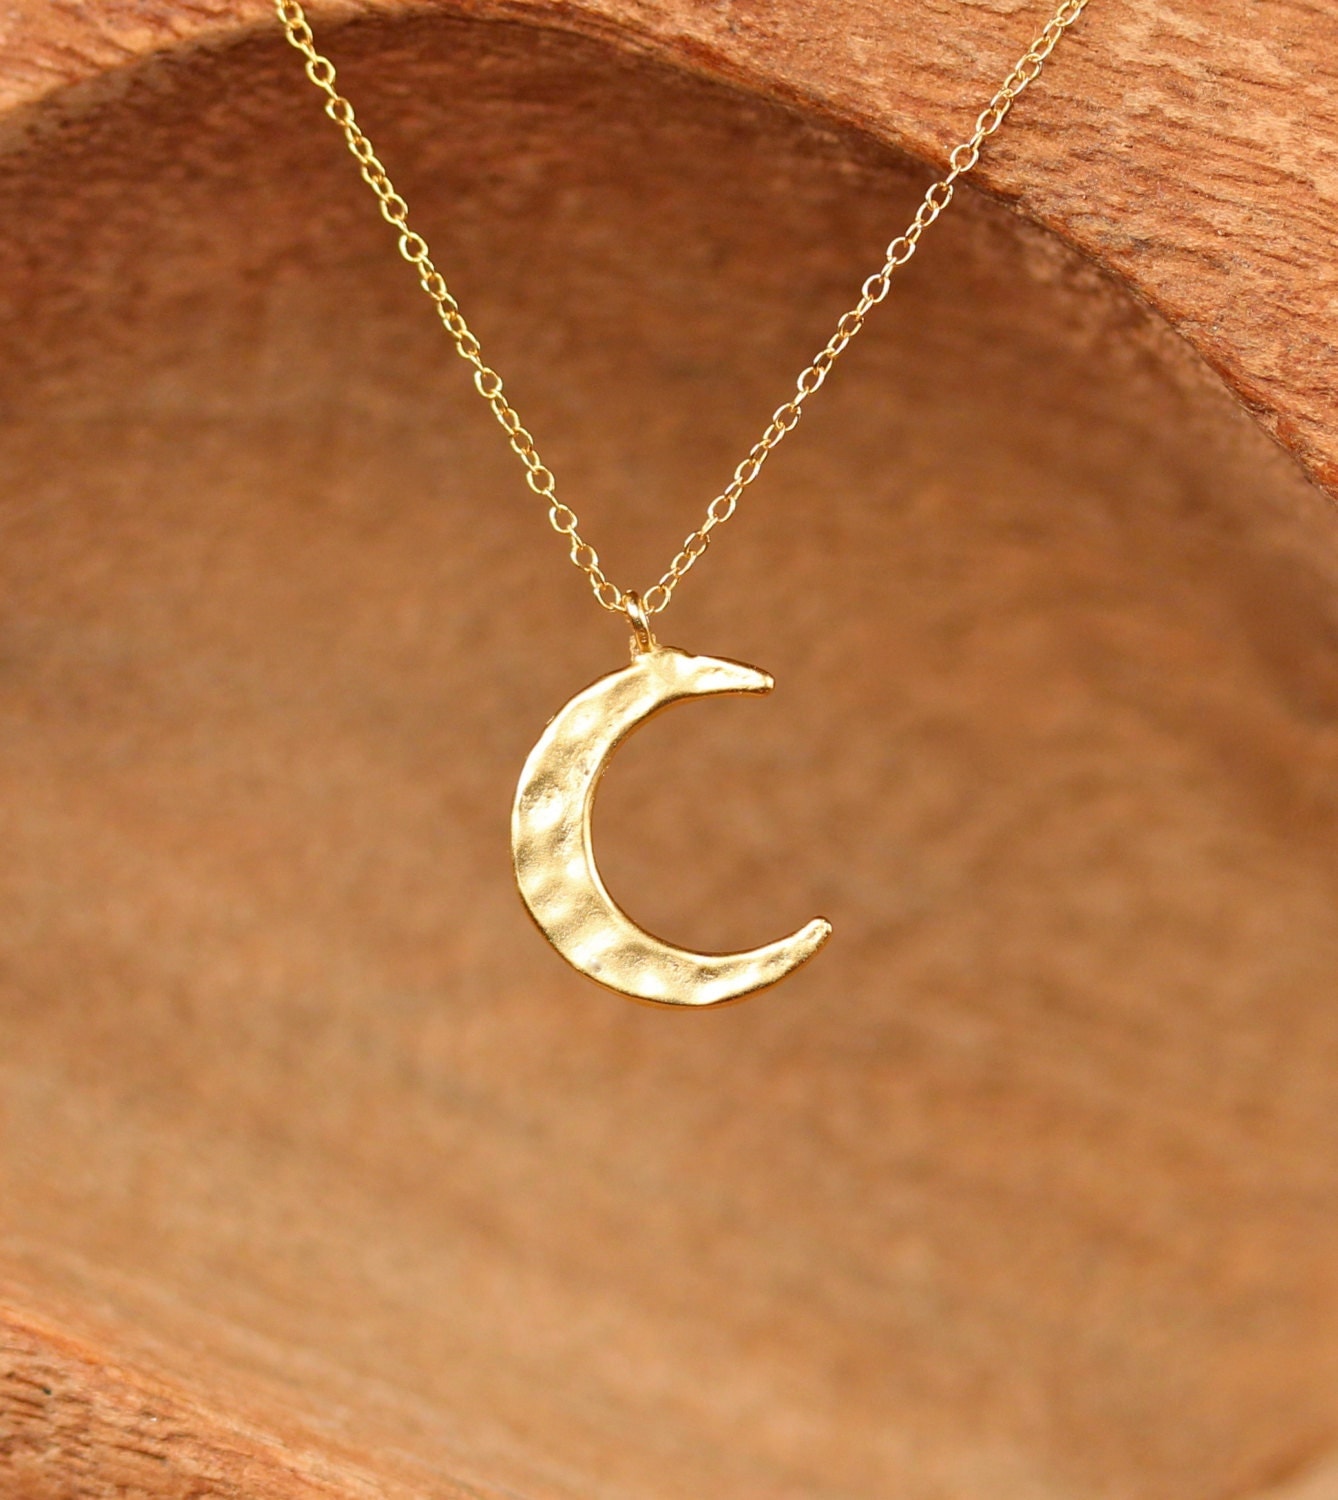 Gold crescent moon necklace - silver moon necklace - hammered moon ...